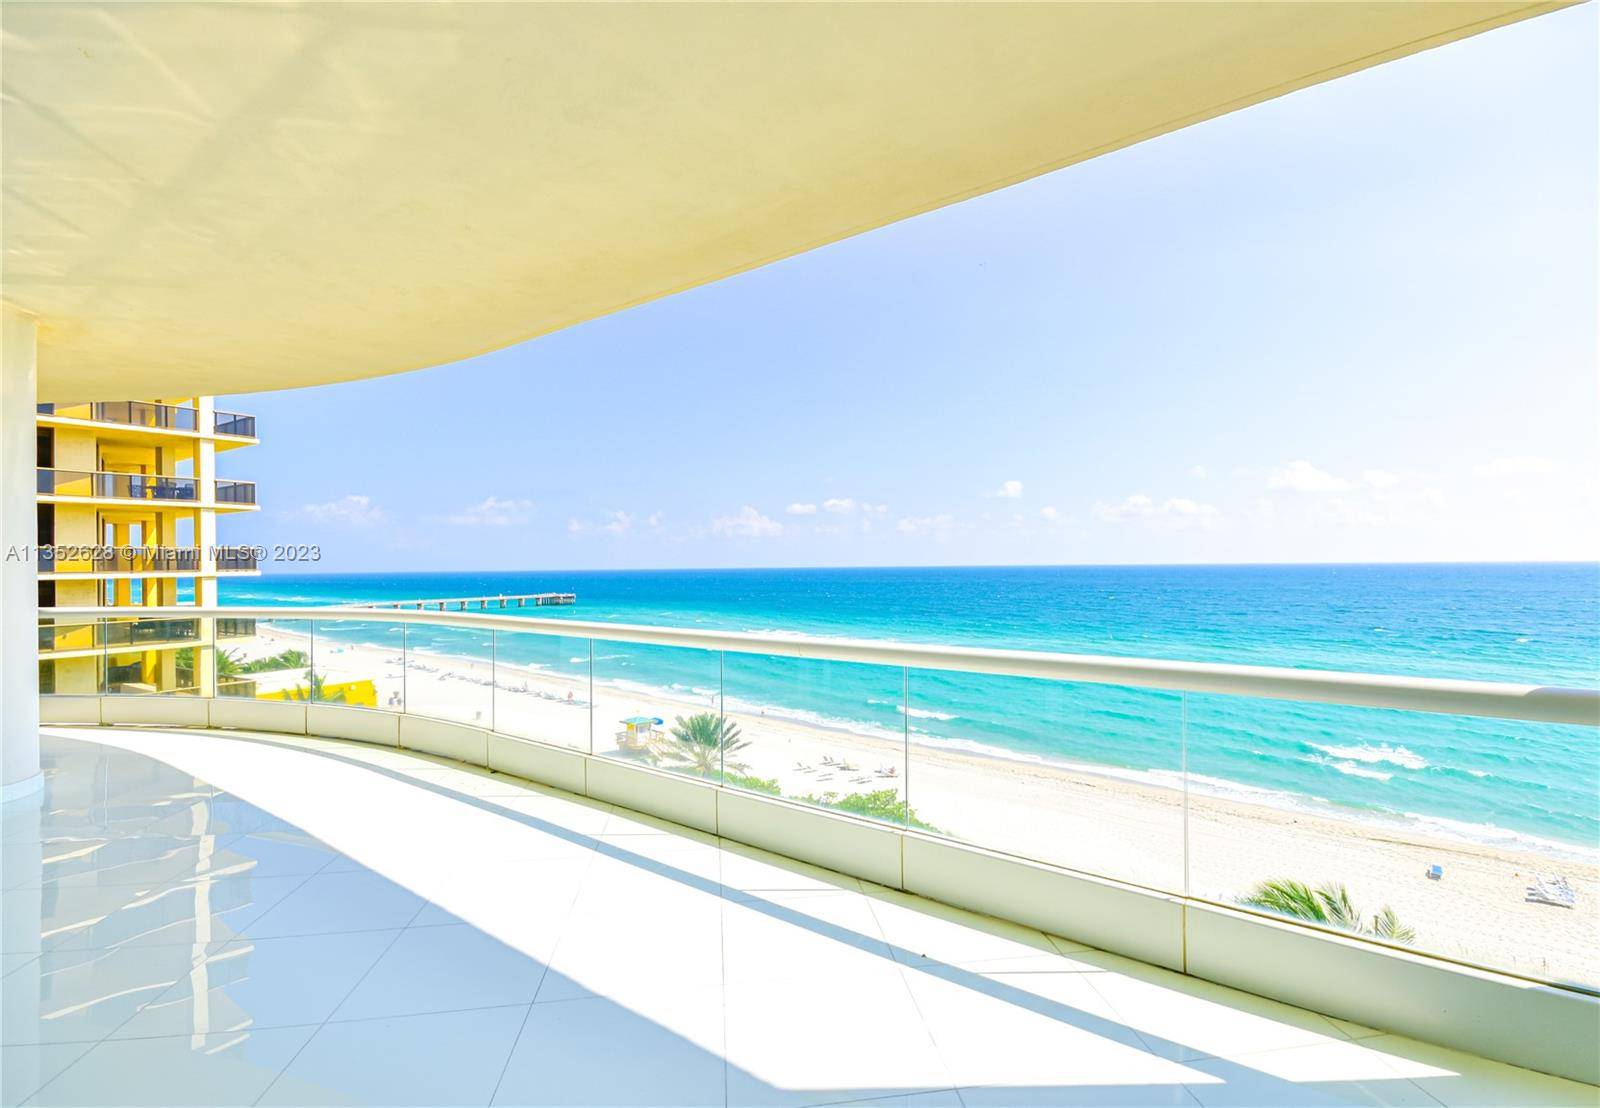 Exquisite 4 bedroom, 6. 5 bath unit at Turnberry Ocean Colony, adorned by professional design.